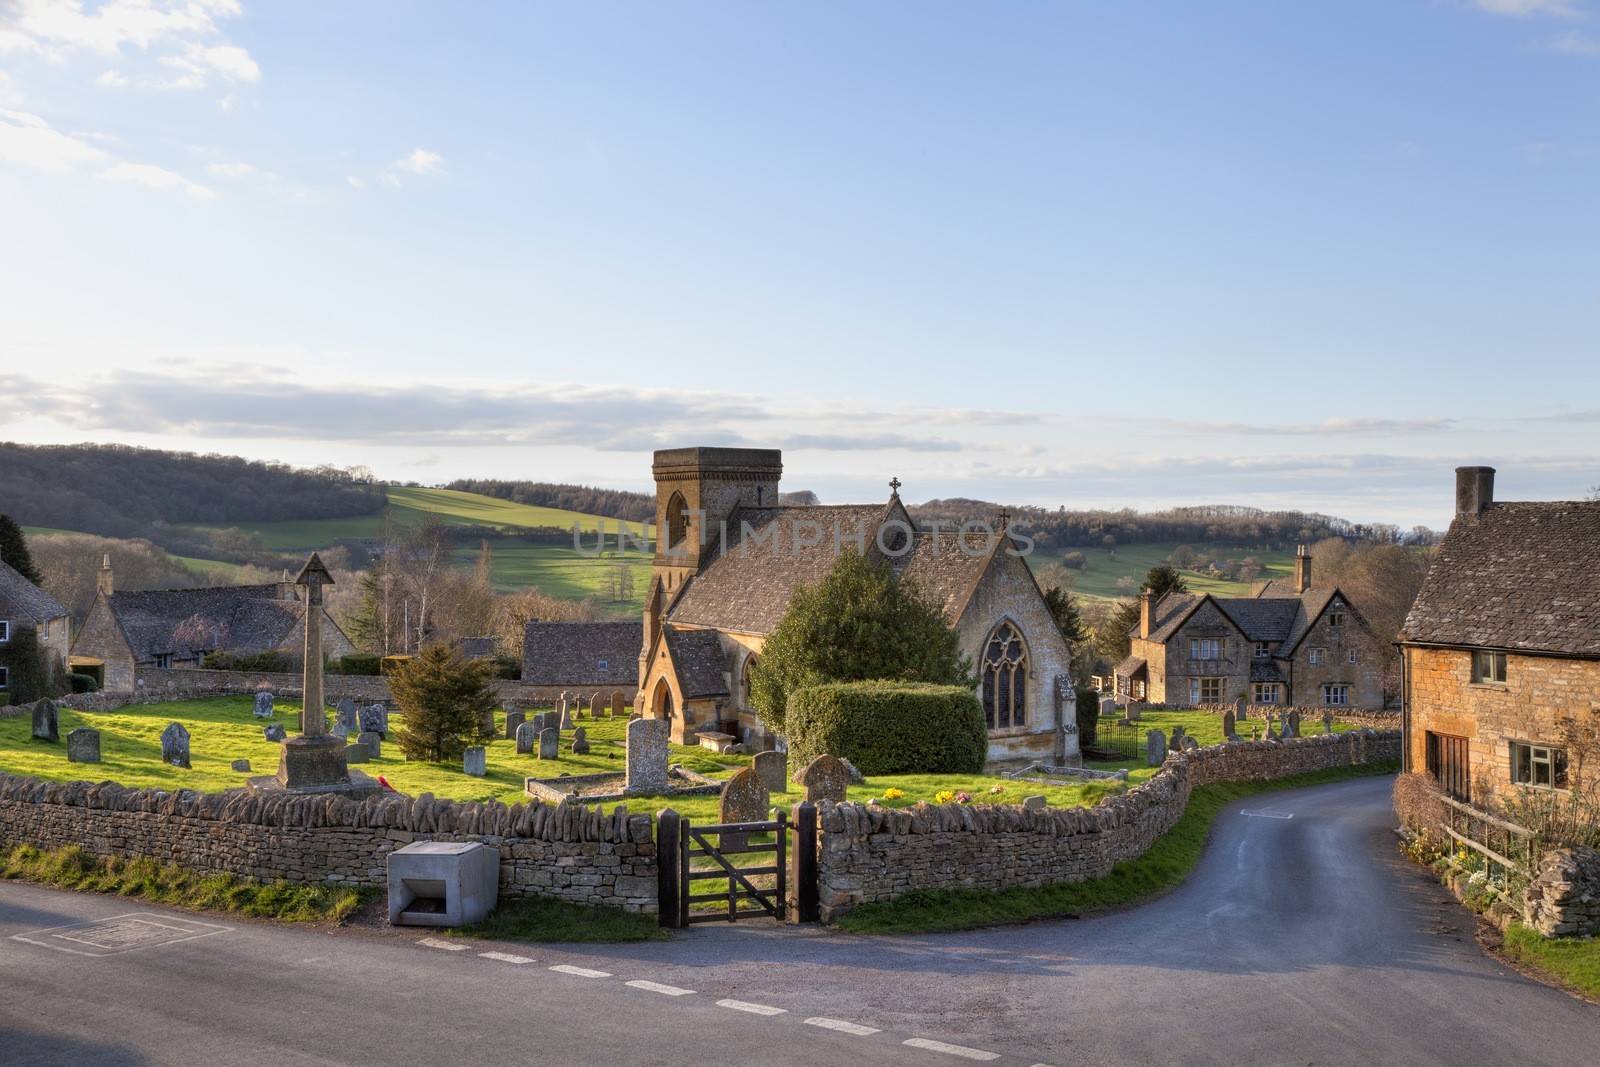 Snowshill village, Cotswolds by andrewroland